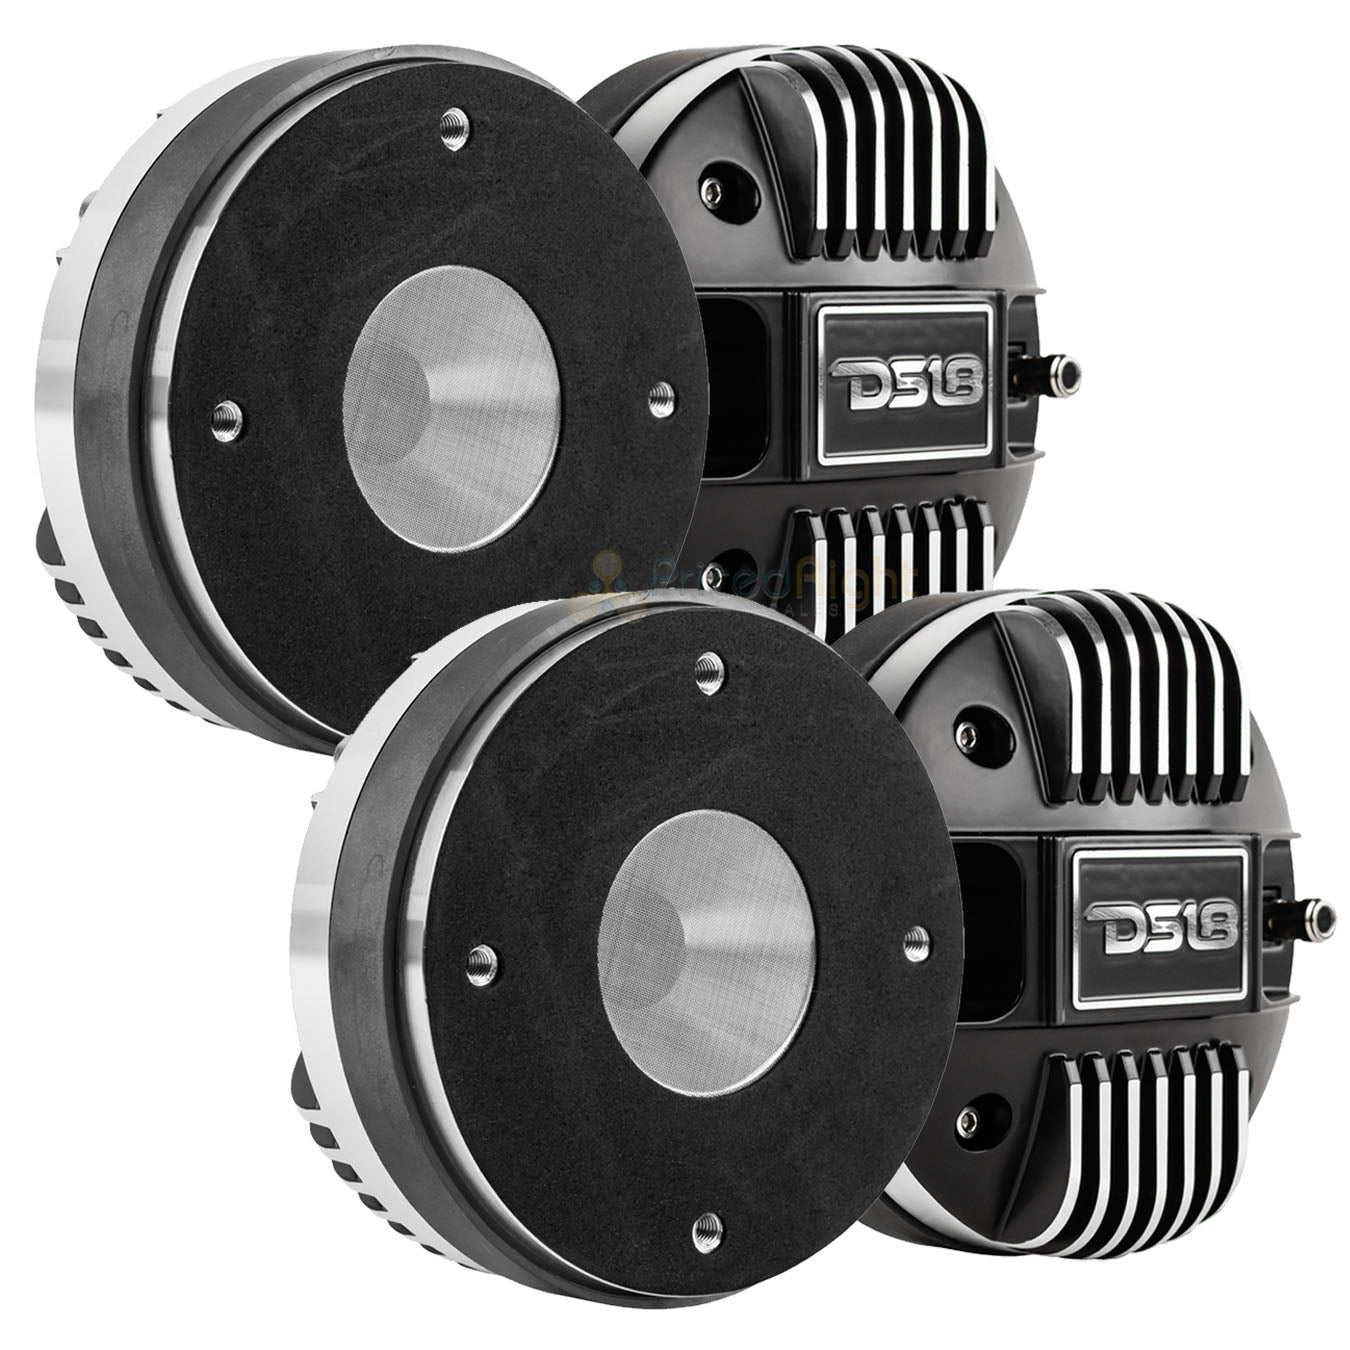 4 Pack DS18 2" Phelonic Compression Drivers 8 Ohm 450 Watts Max Tweeters PRO-D1F